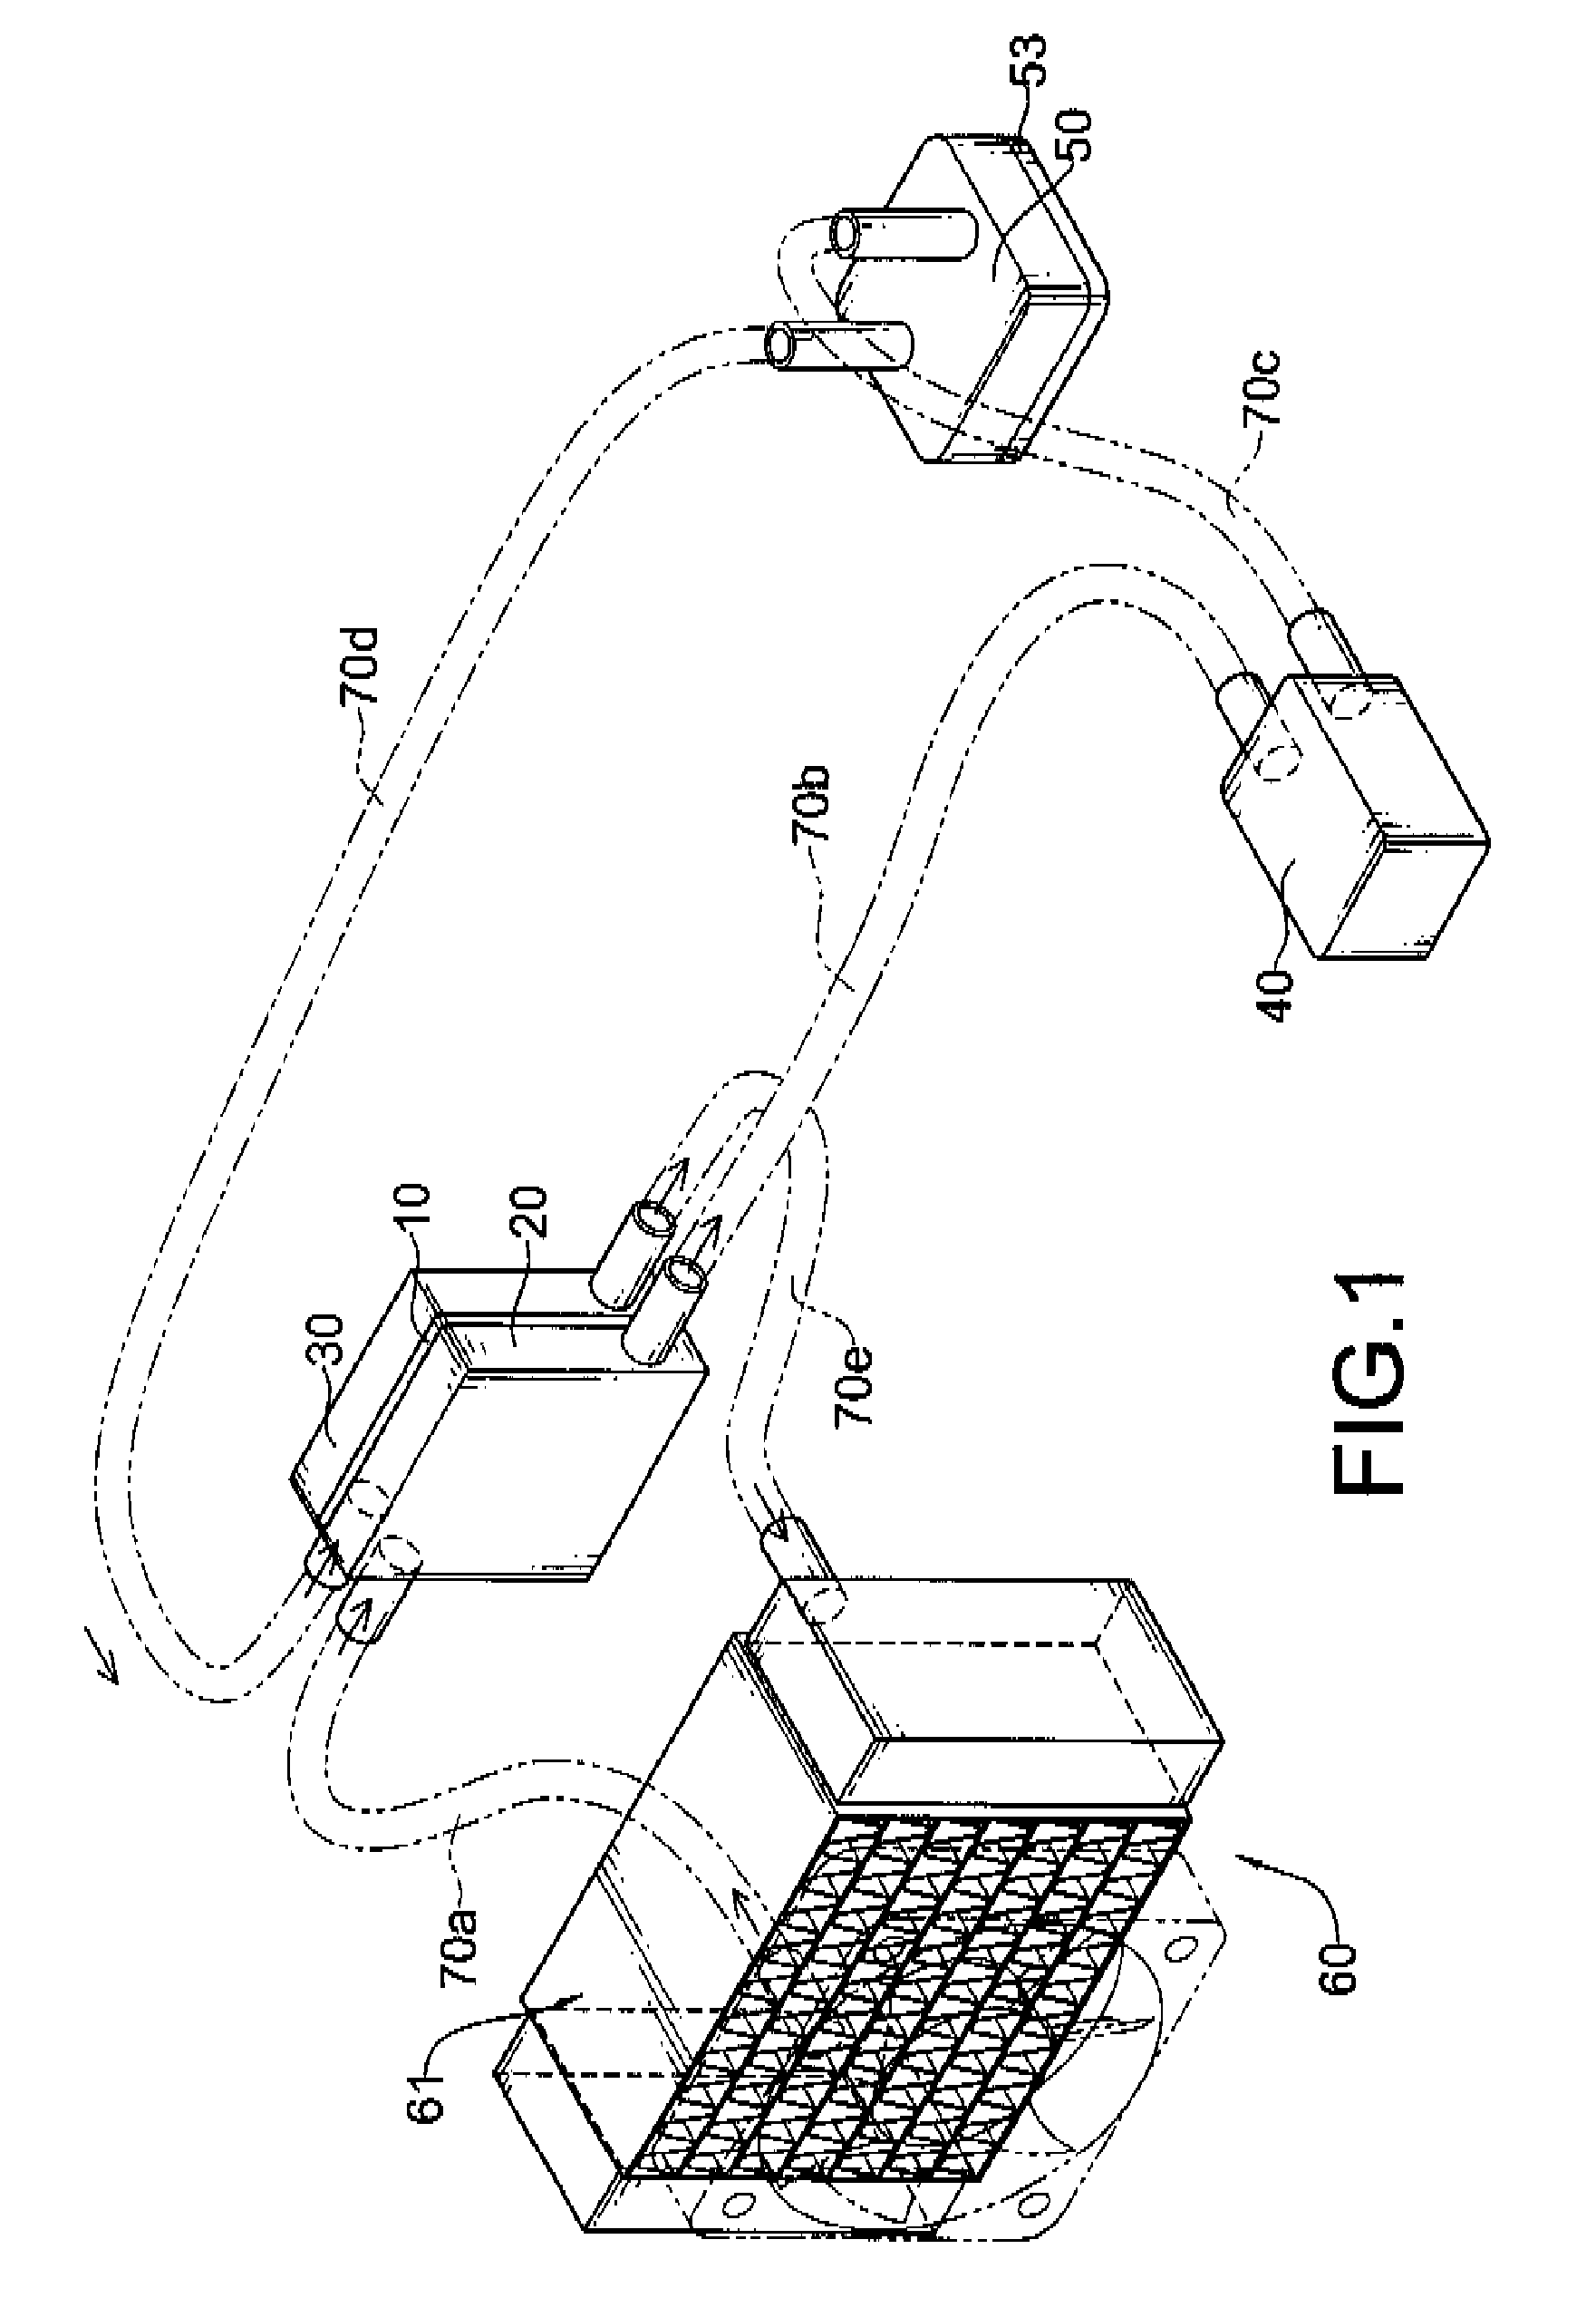 Liquid cooling system with thermoeletric cooling module